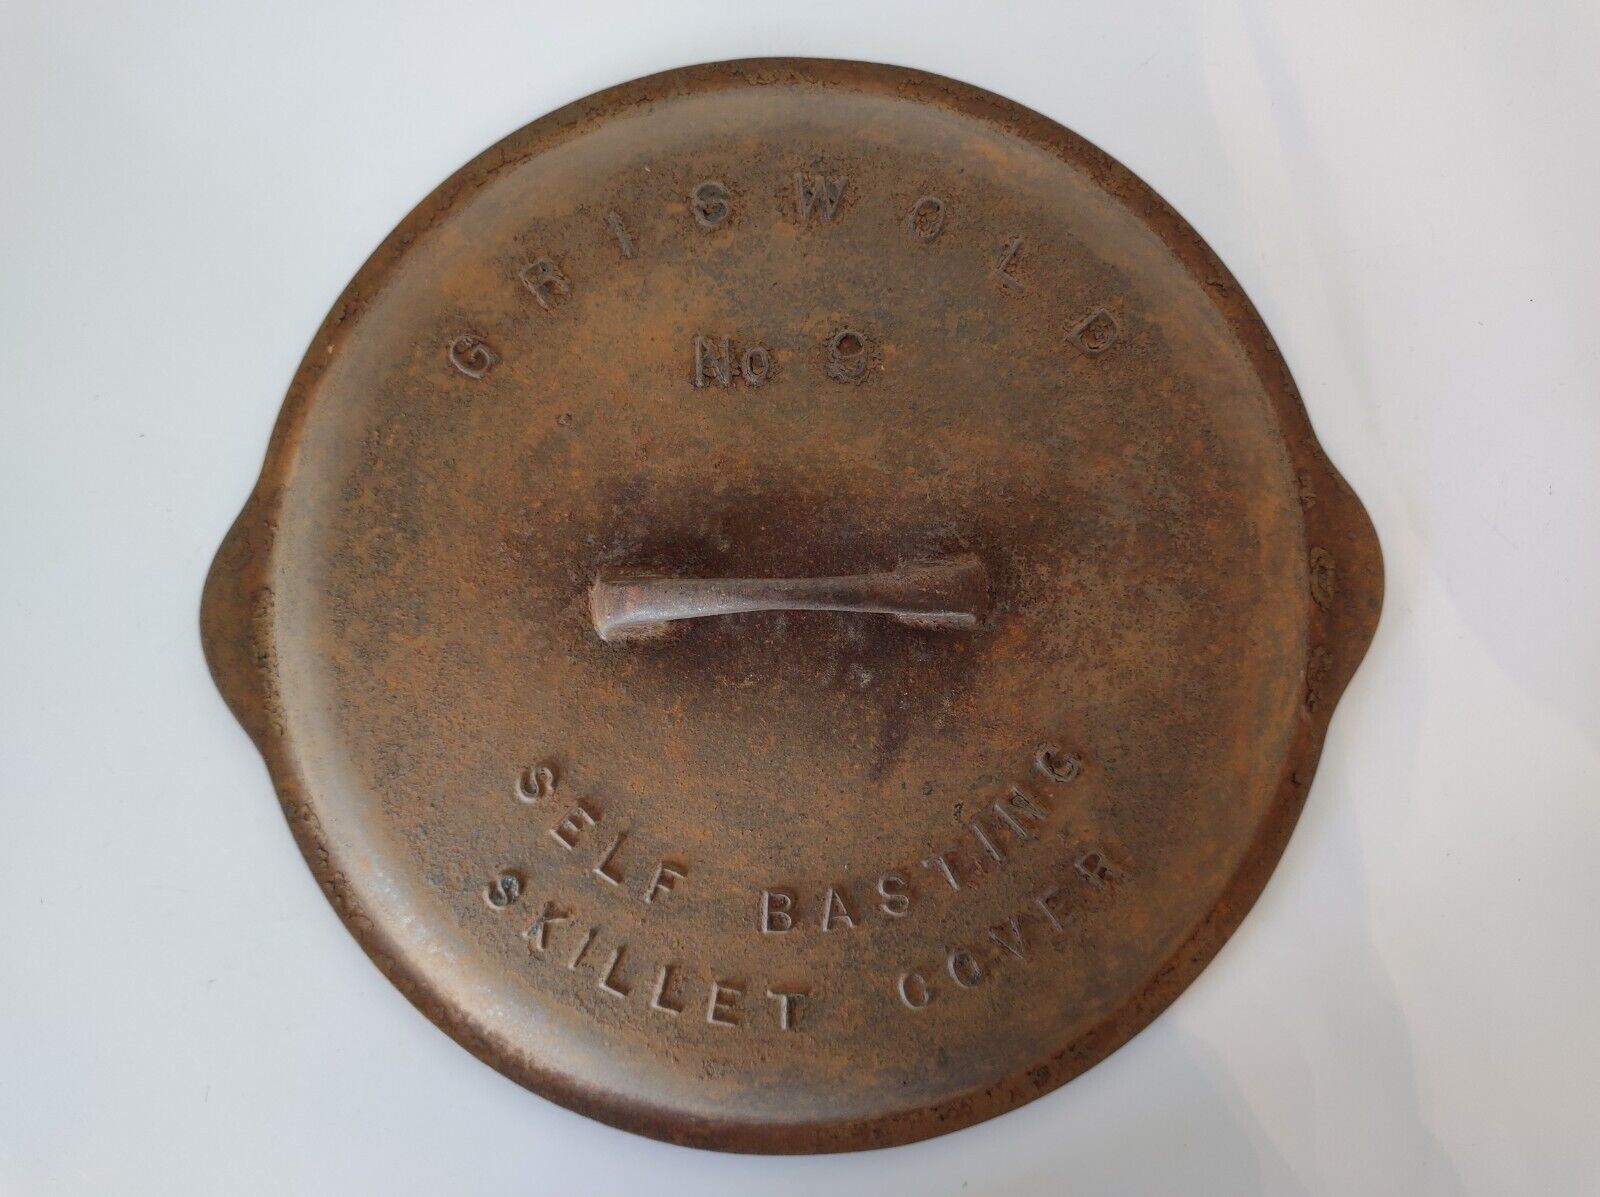 Griswold Cast Iron #9 469B Skillet Lid Cover Self Basting Marked Raised Letters